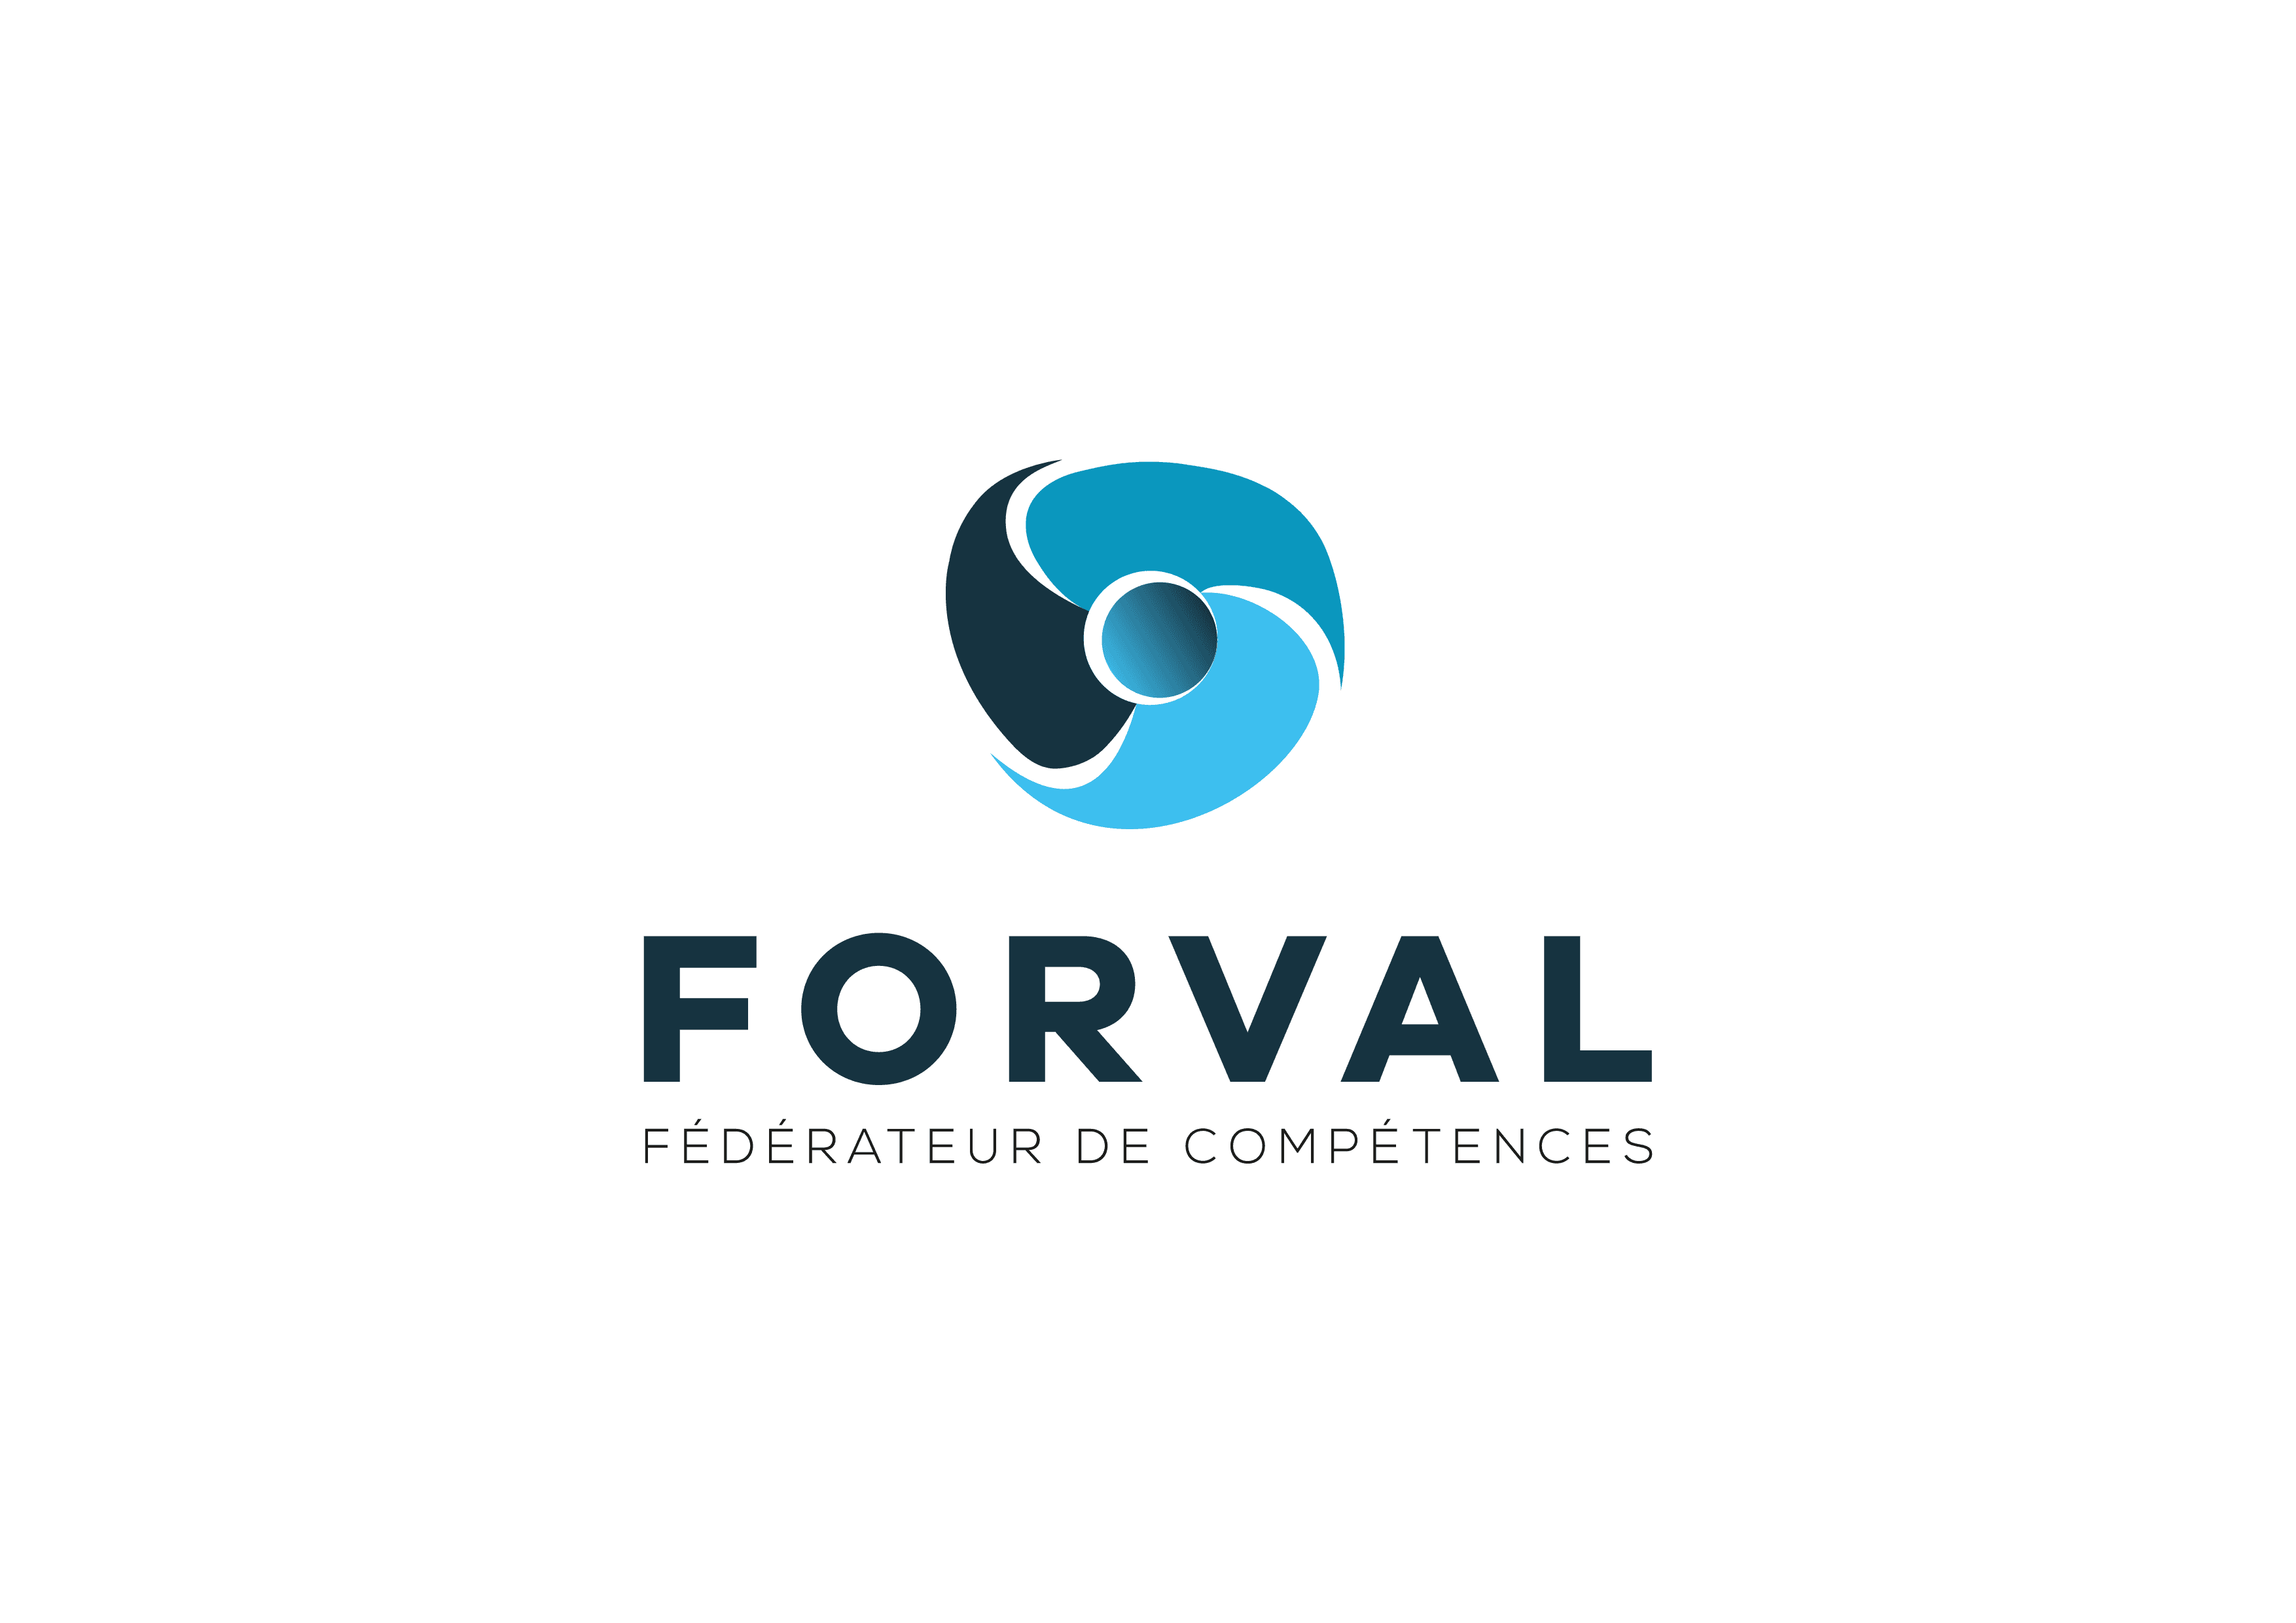 FORVAL